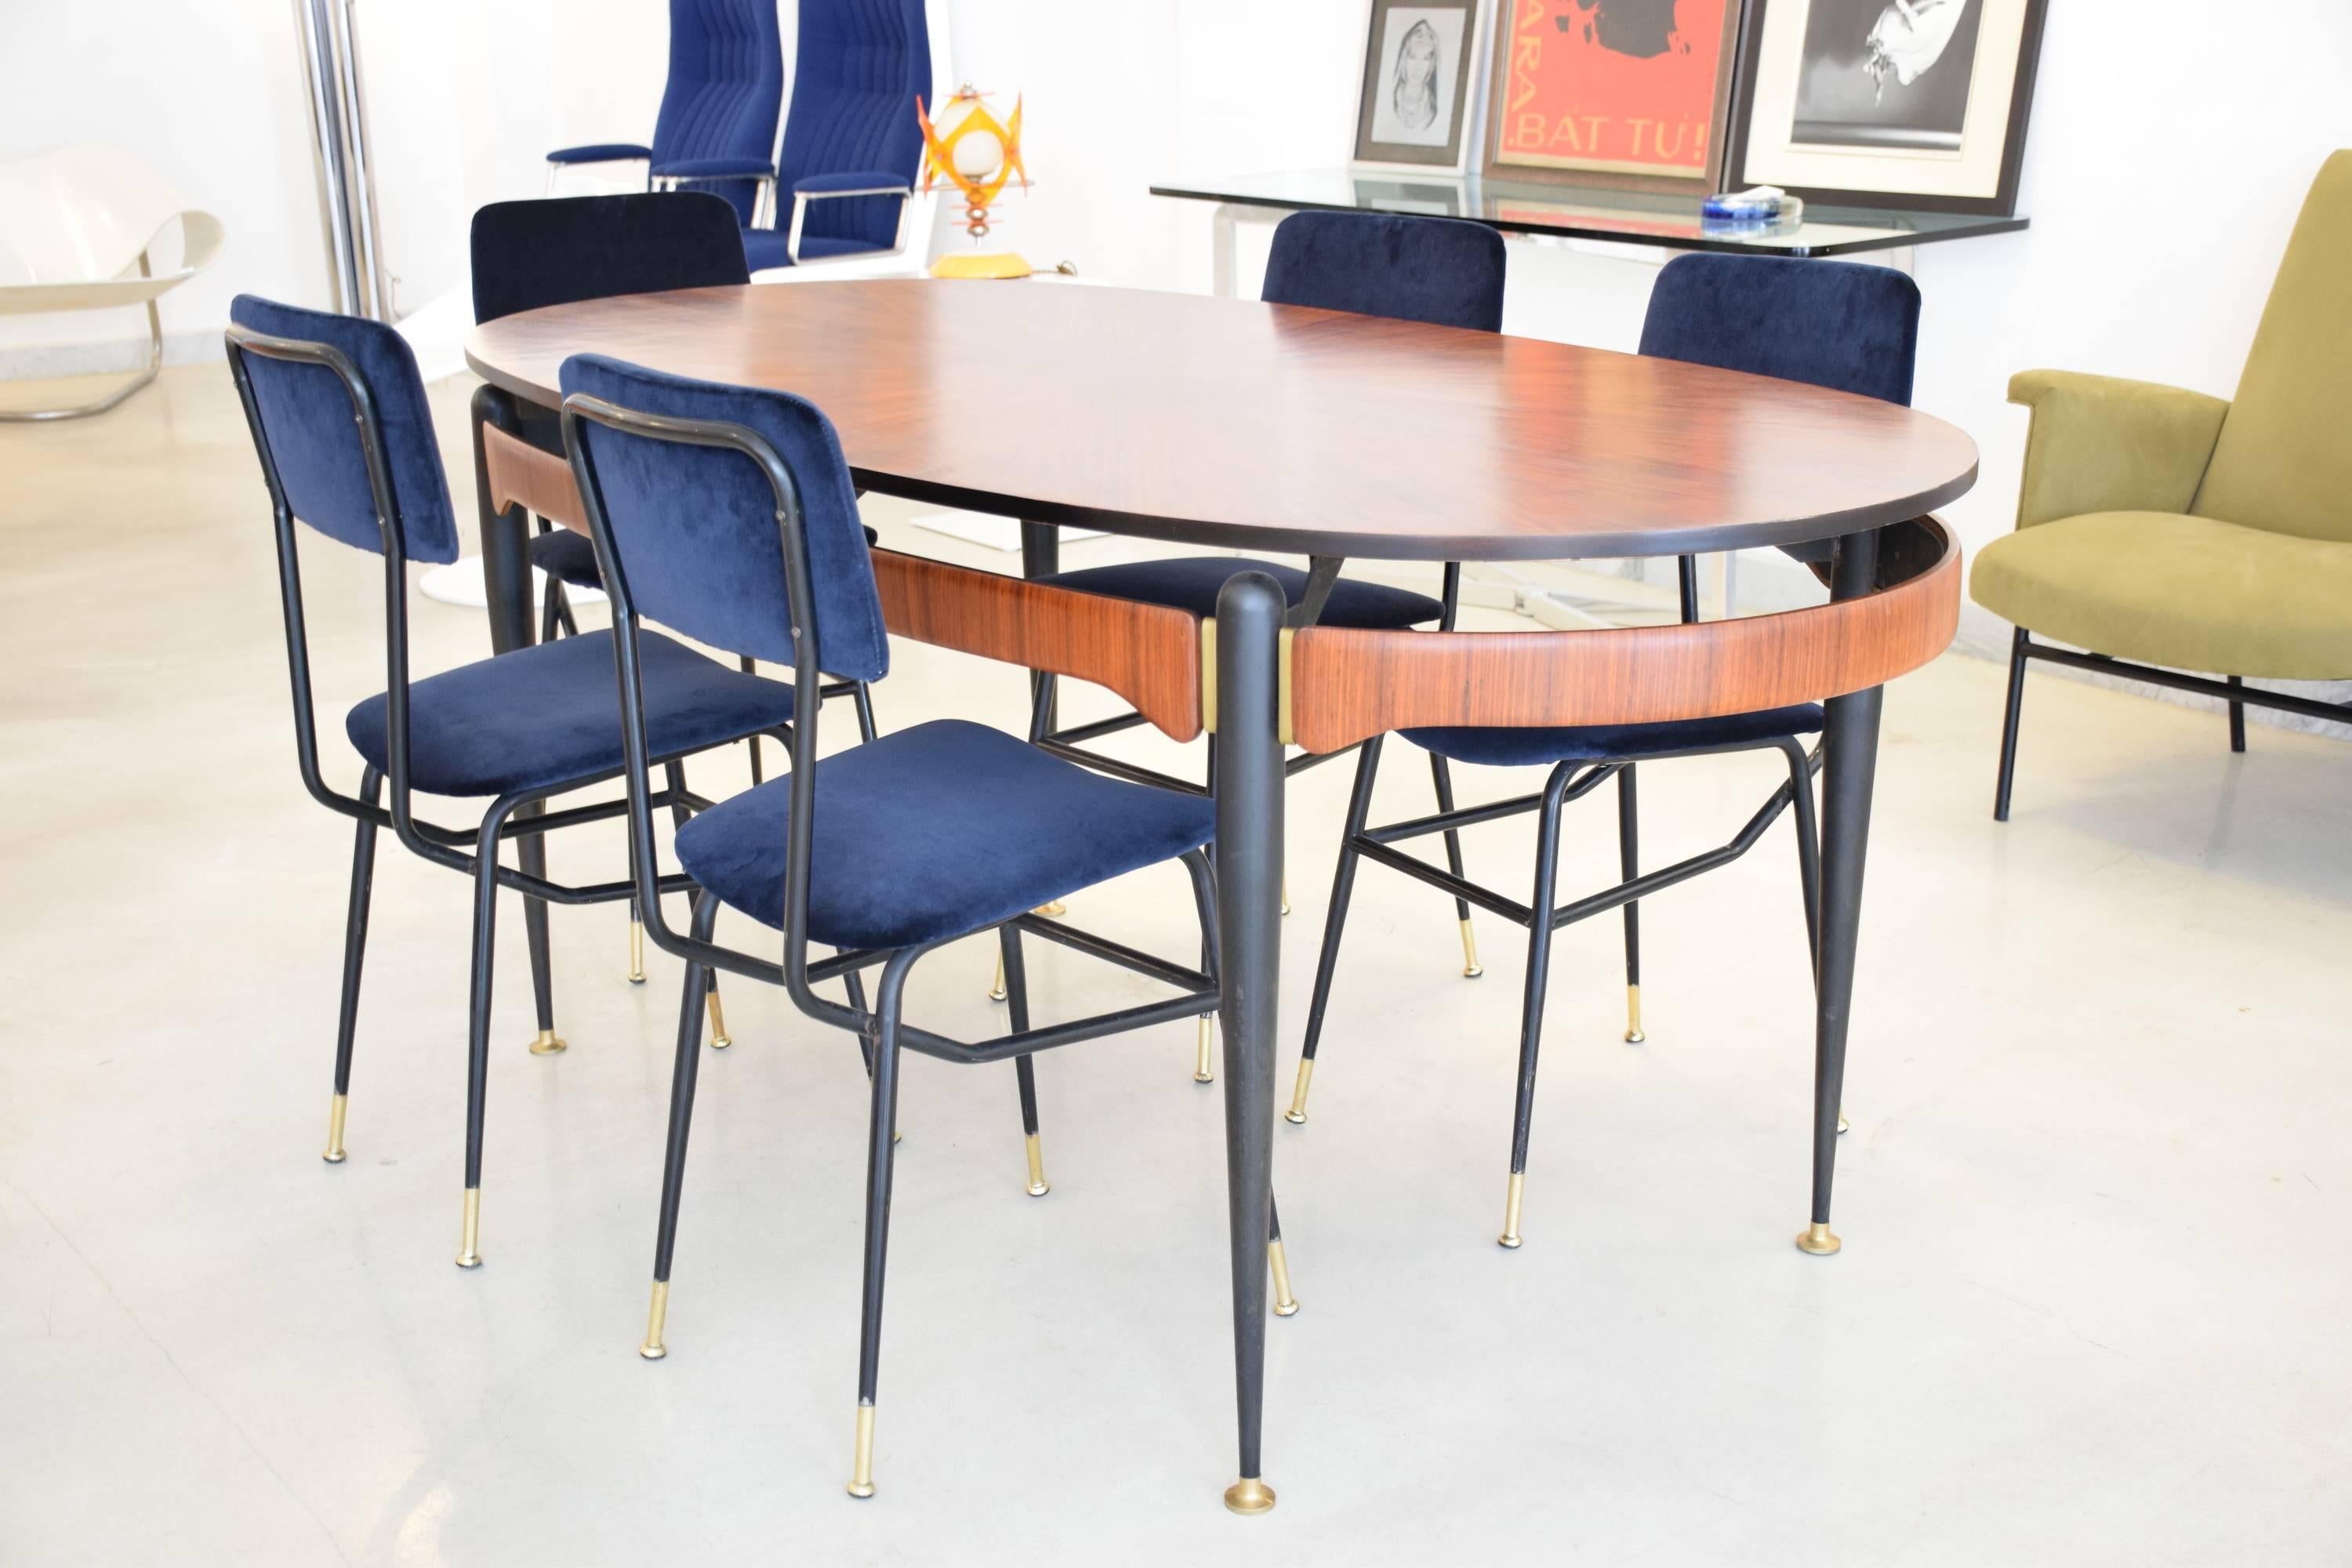 Set of six Italian 20th century vintage restored dining chairs by Studio BBPR designed with a graphic black lacquered steel structure and polished brass endings. Re-upholstered in a high quality Lelièvre Paris midnight blue velvet upholstery and new